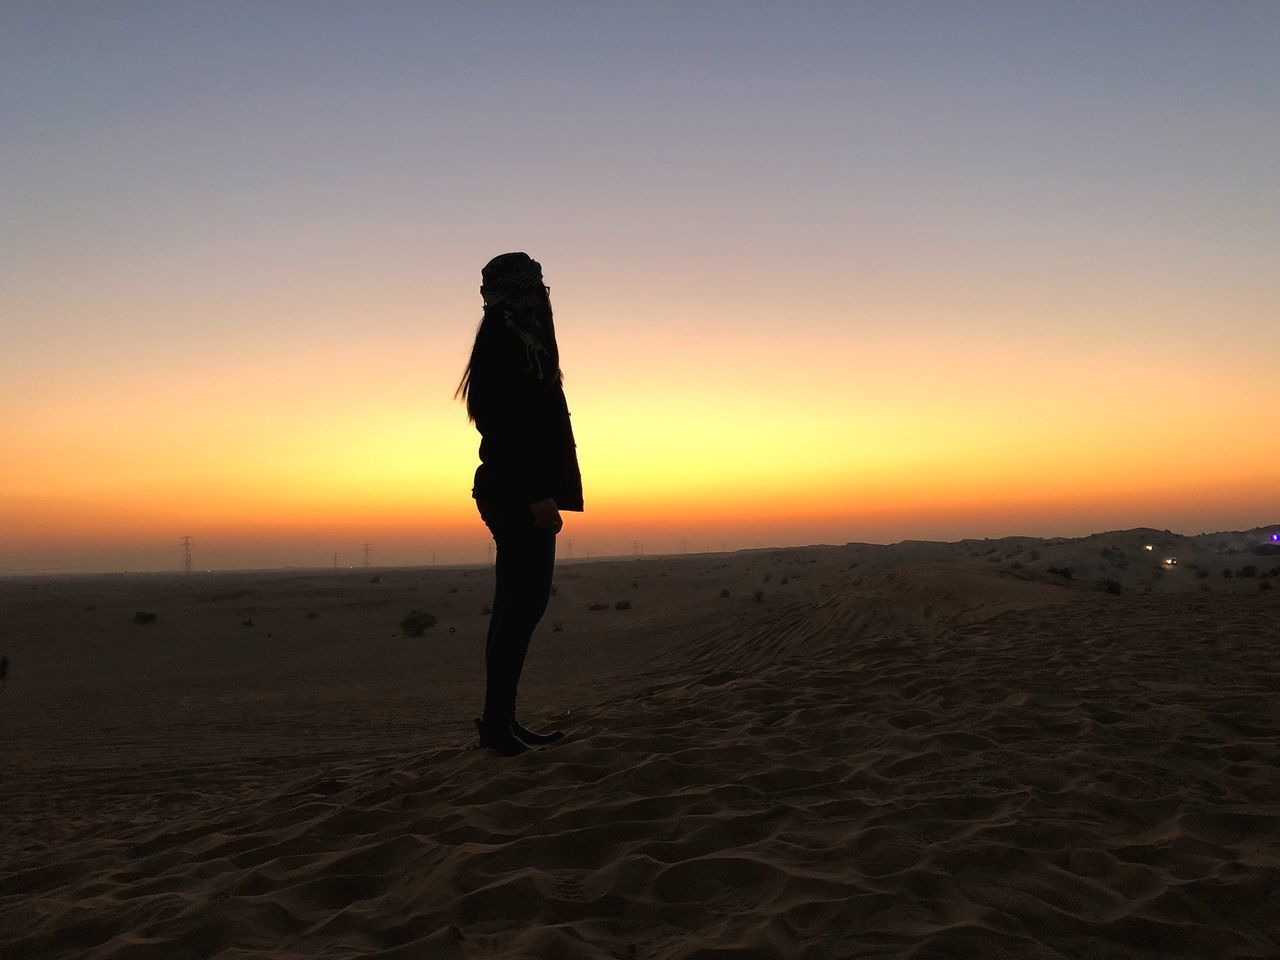 sunset, sky, land, sand, beach, one person, orange color, beauty in nature, scenics - nature, full length, real people, lifestyles, tranquility, leisure activity, tranquil scene, standing, copy space, nature, women, outdoors, arid climate